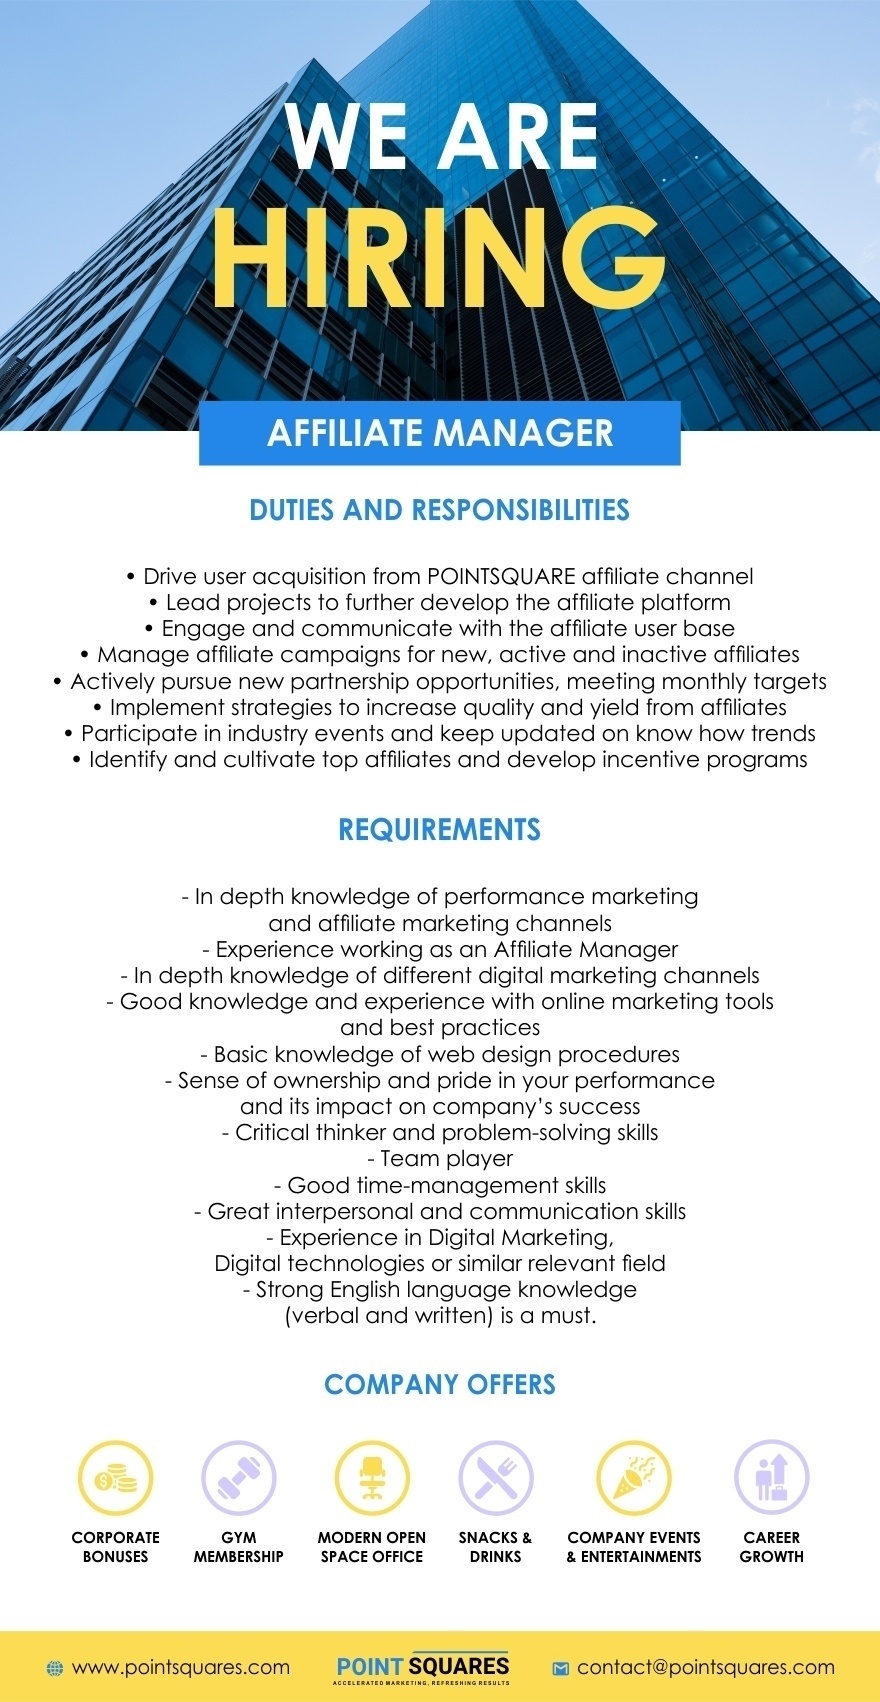 POINTSQUARES OÜ Affiliate Manager